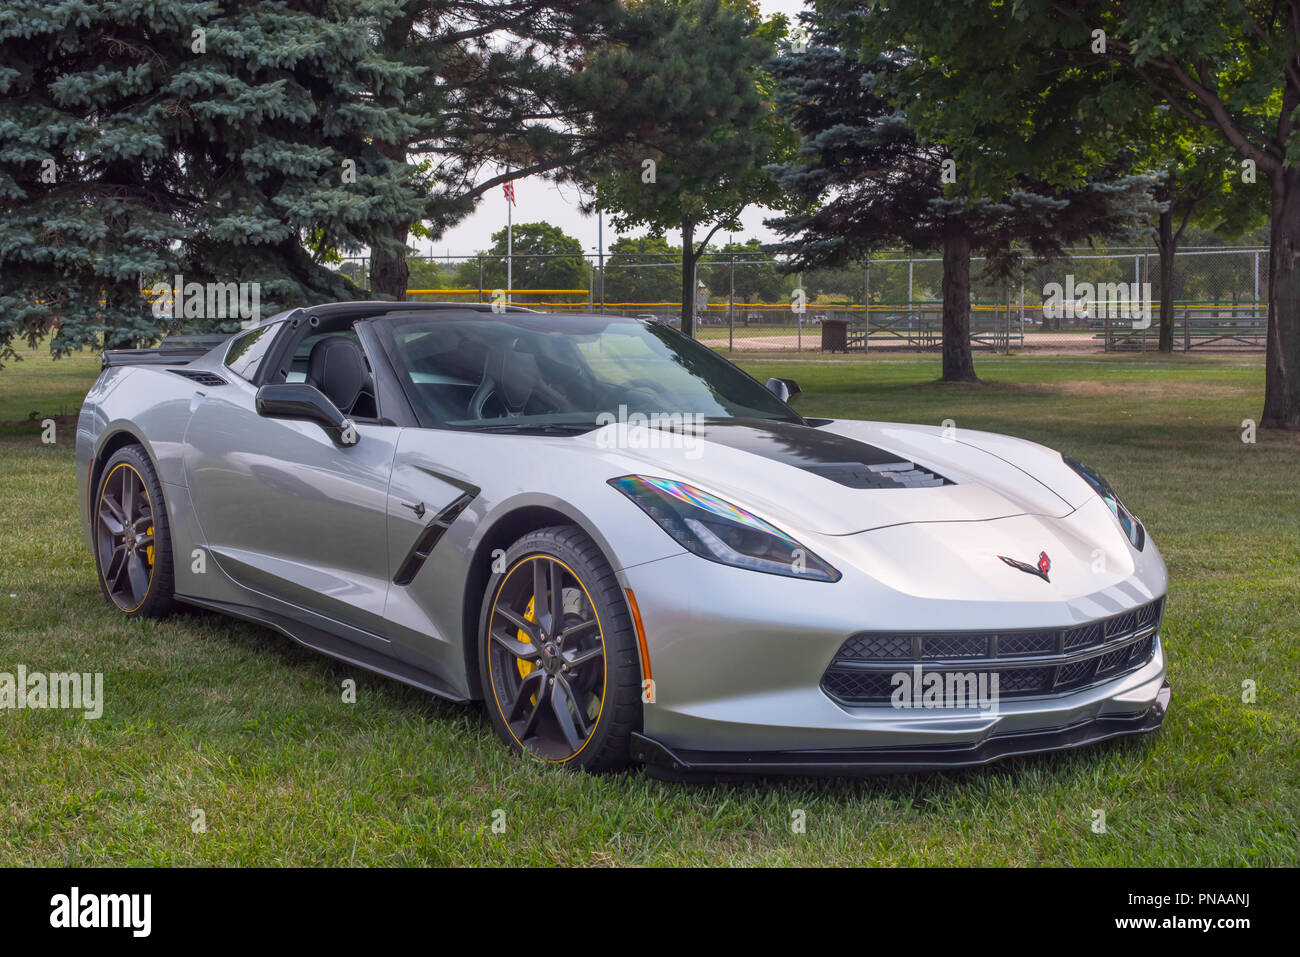 ROYAL OAK, MI/USA - AUGUST 16, 2018: A Chevrolet Corvette at the Woodward Dream Cruise, the world's largest one-day automotive event. Stock Photo